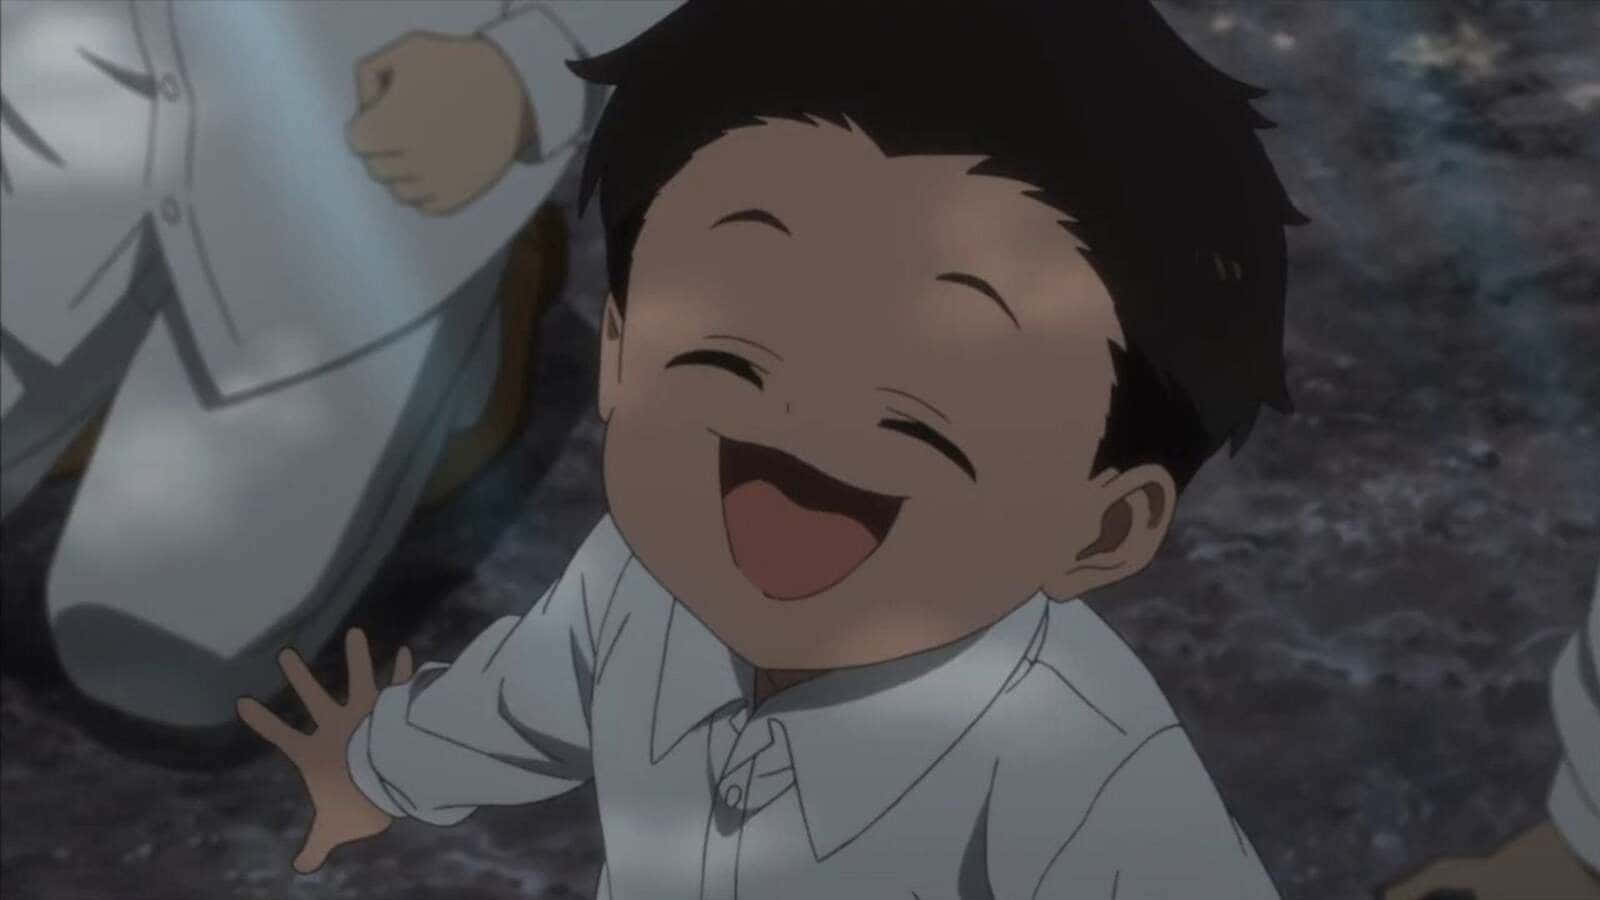 Phil from The Promised Neverland, Smiling Against a Grunge Background Wallpaper